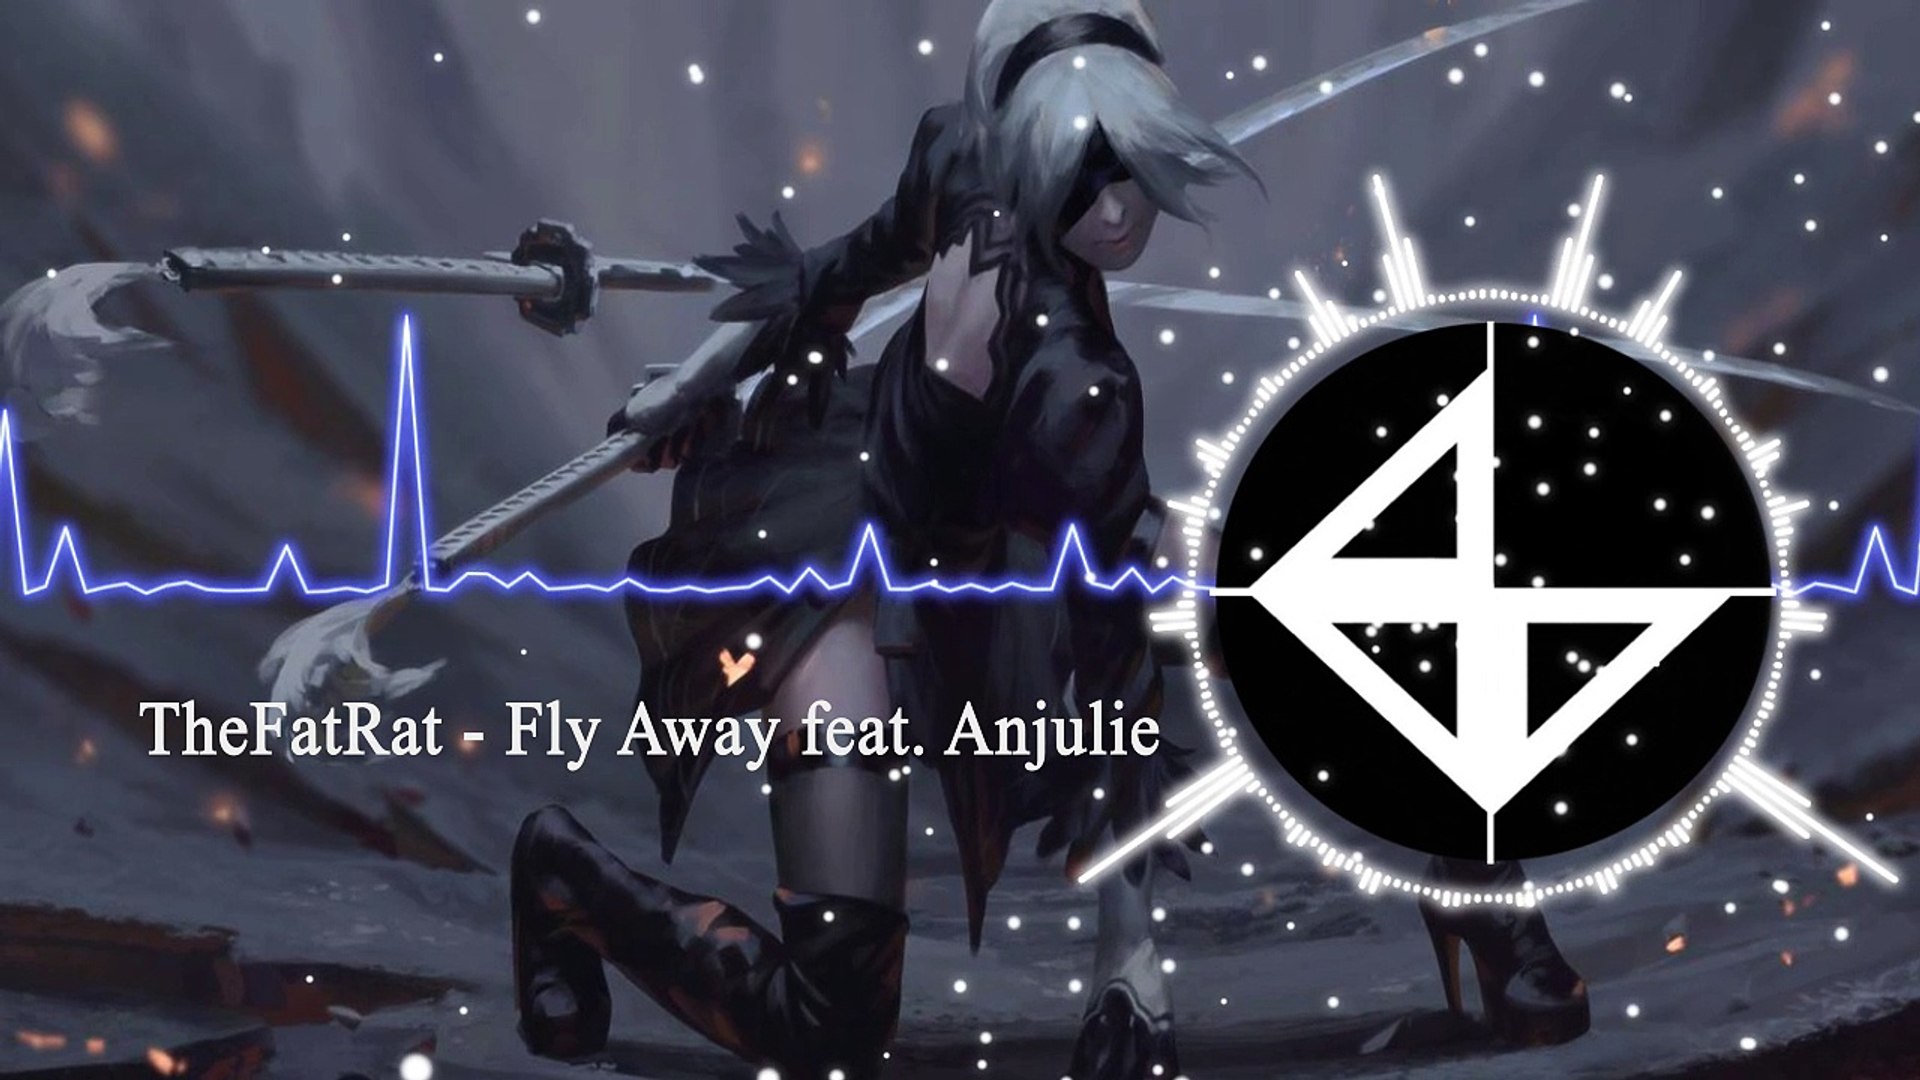 Nightcore] - TheFatRat - Fly Away feat. Anjulie - Video Dailymotion